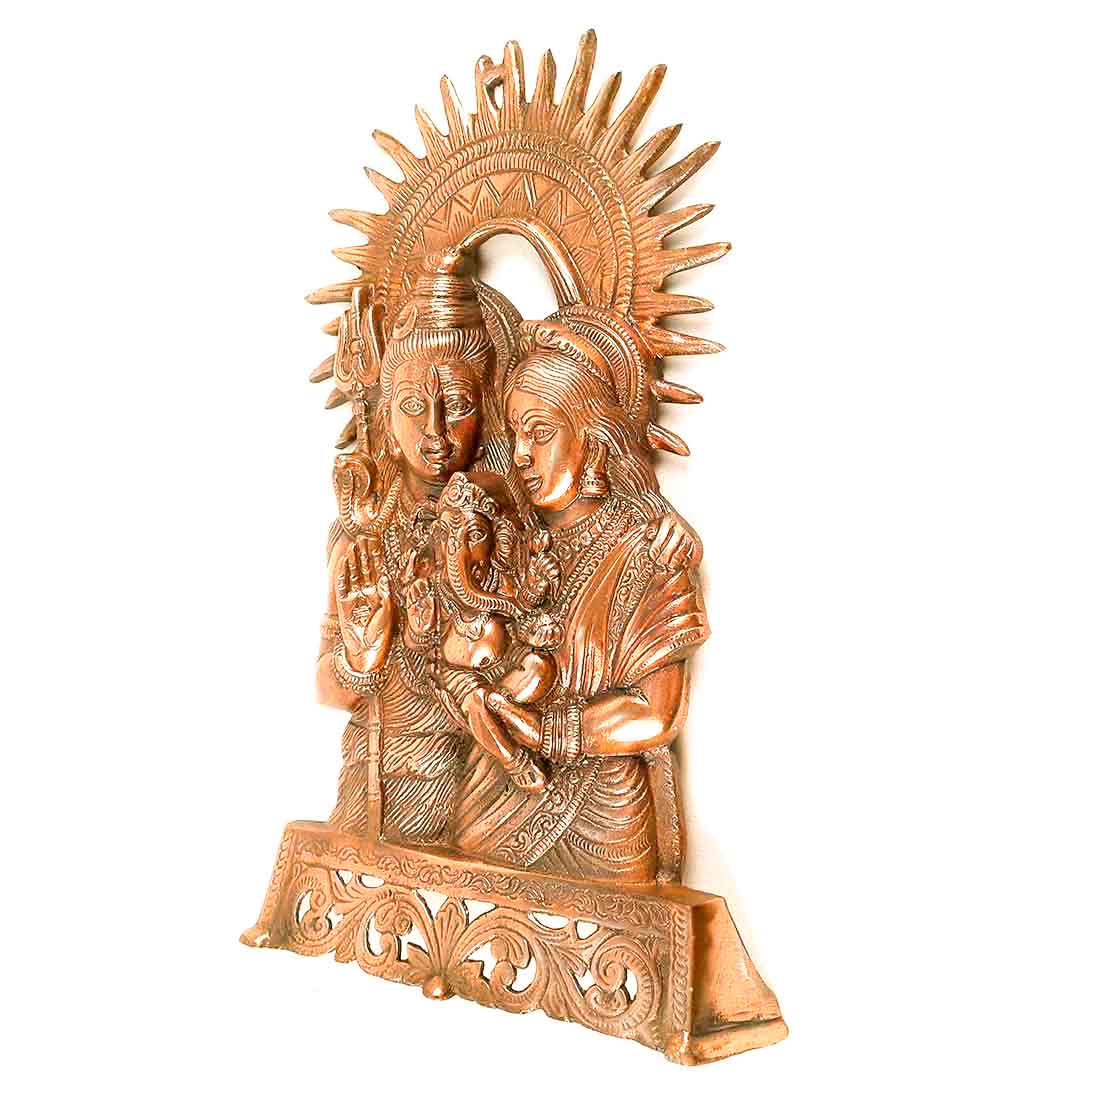 Shiv Parvati Wall hanging - for Home, Puja, Living Room & Office | Antique Wall Idol for Religious & Spiritual Decor   - 16 Inch